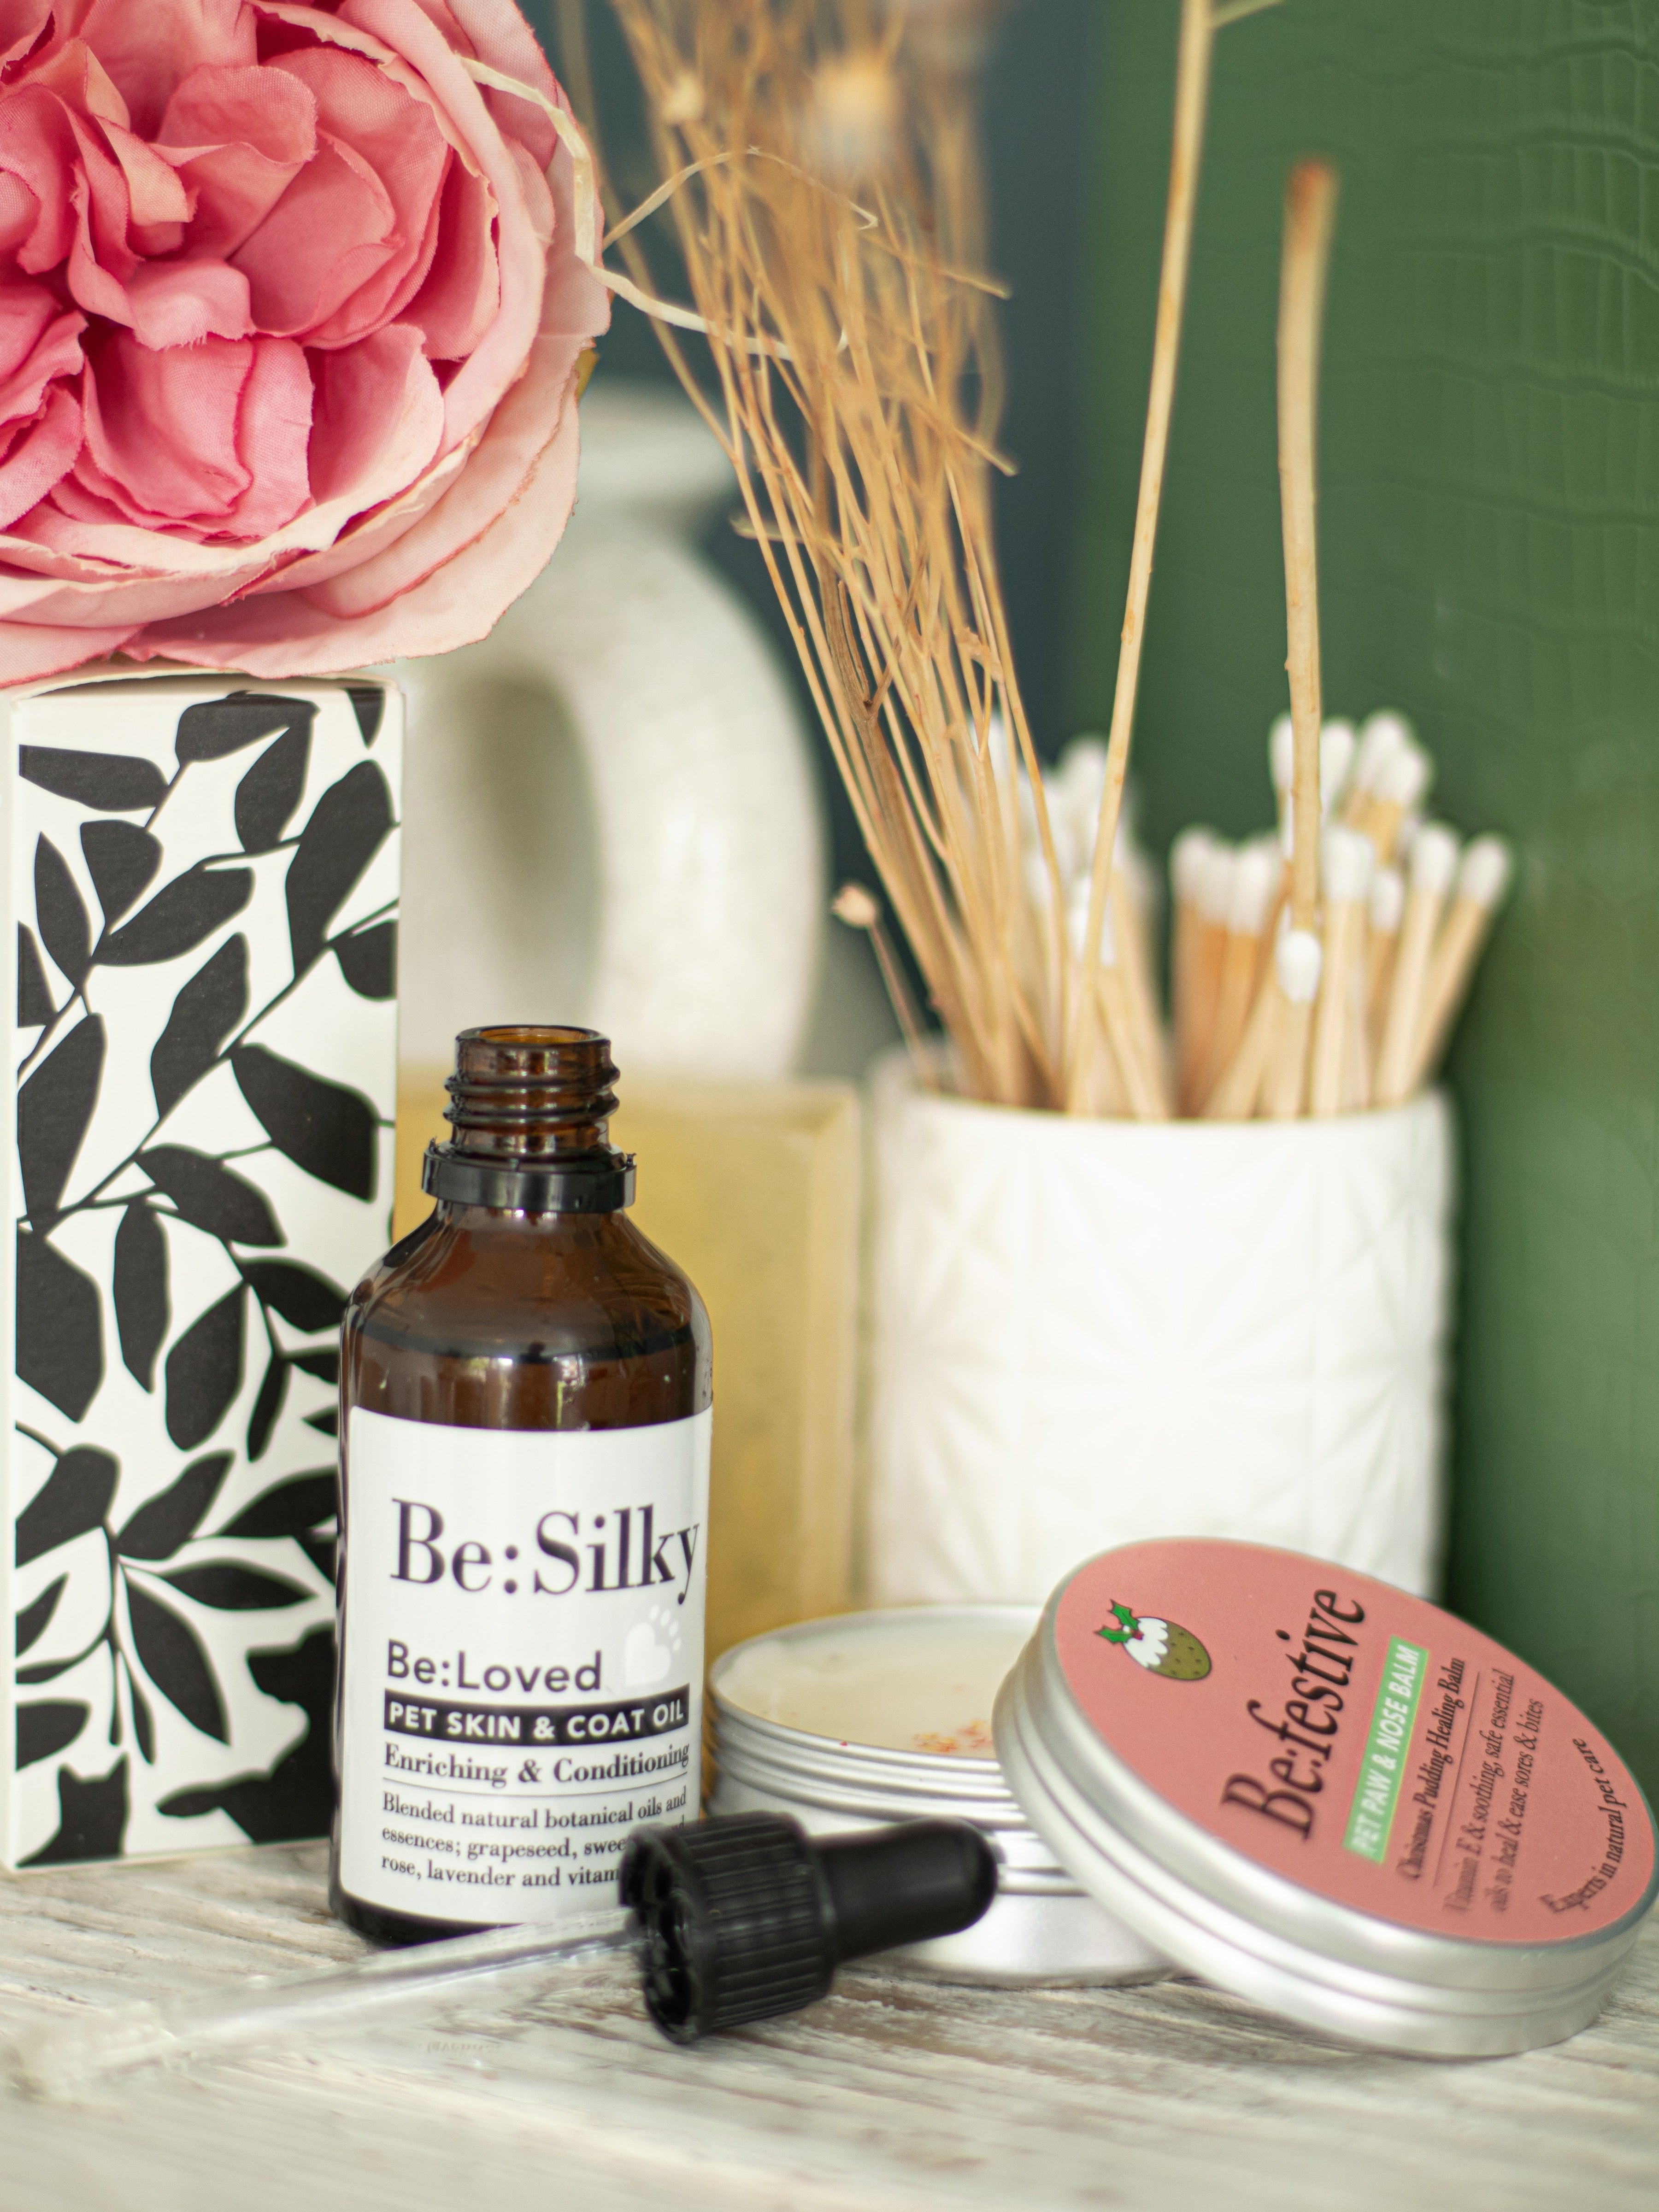 Lifestyle shot of Be:Silky and Be:Festive on a desk with flowers in the background